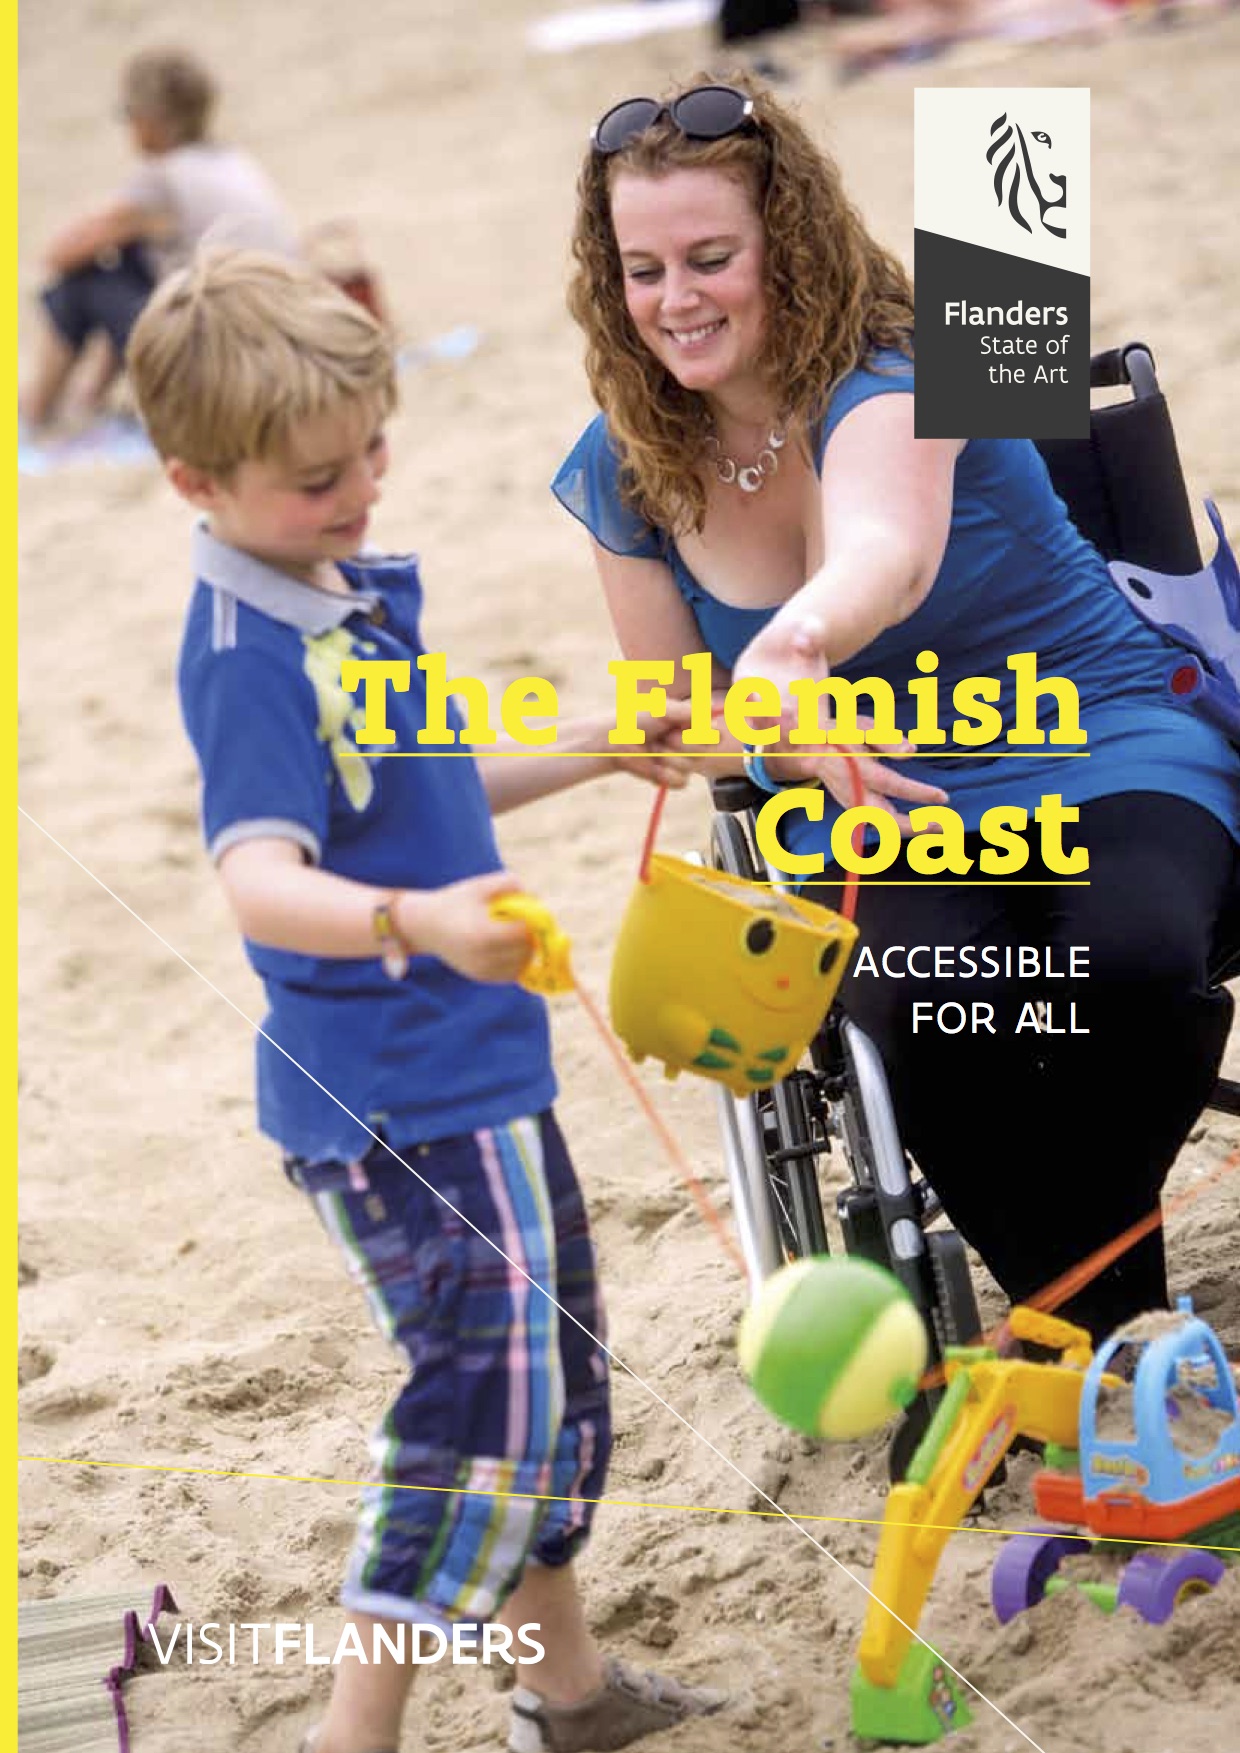 The Flemish Coast - cover image, wheelchair user and child on beach play with sand toys